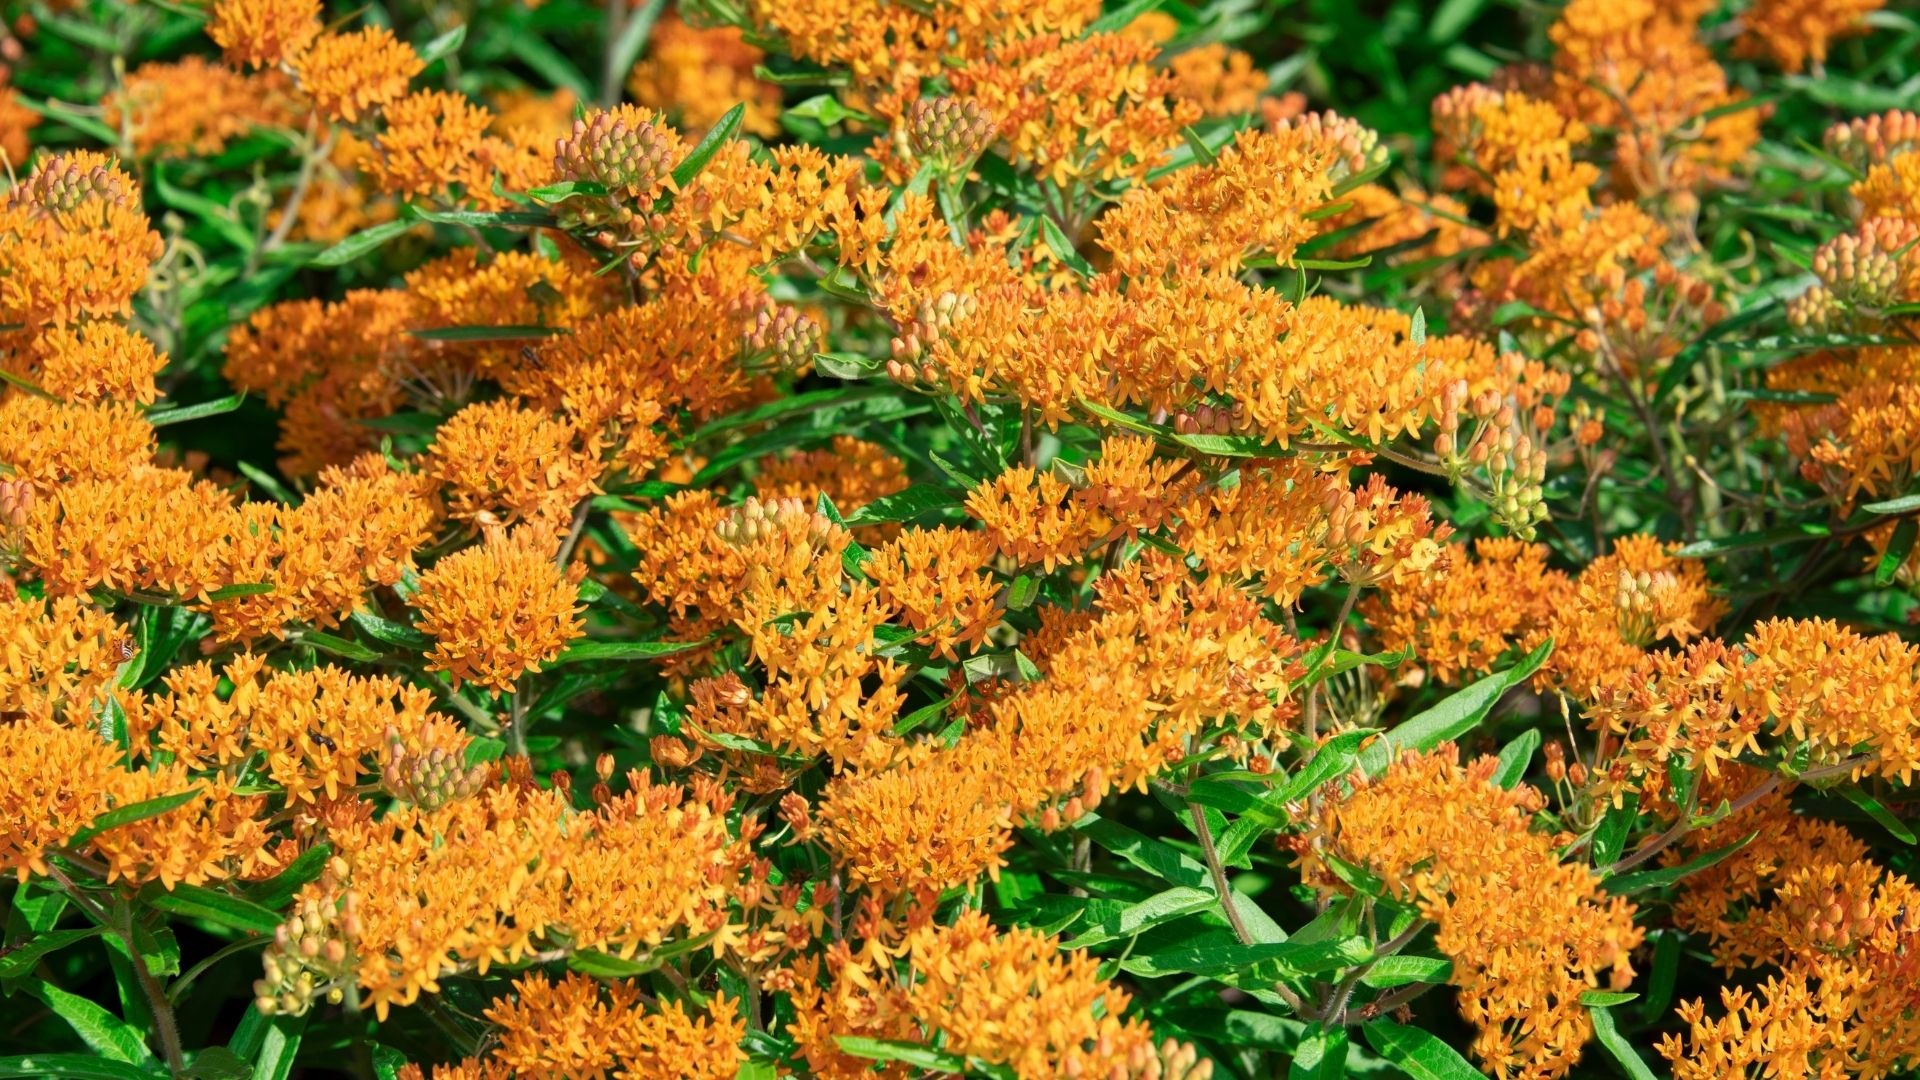 Wildflowers: Butterfly Weed